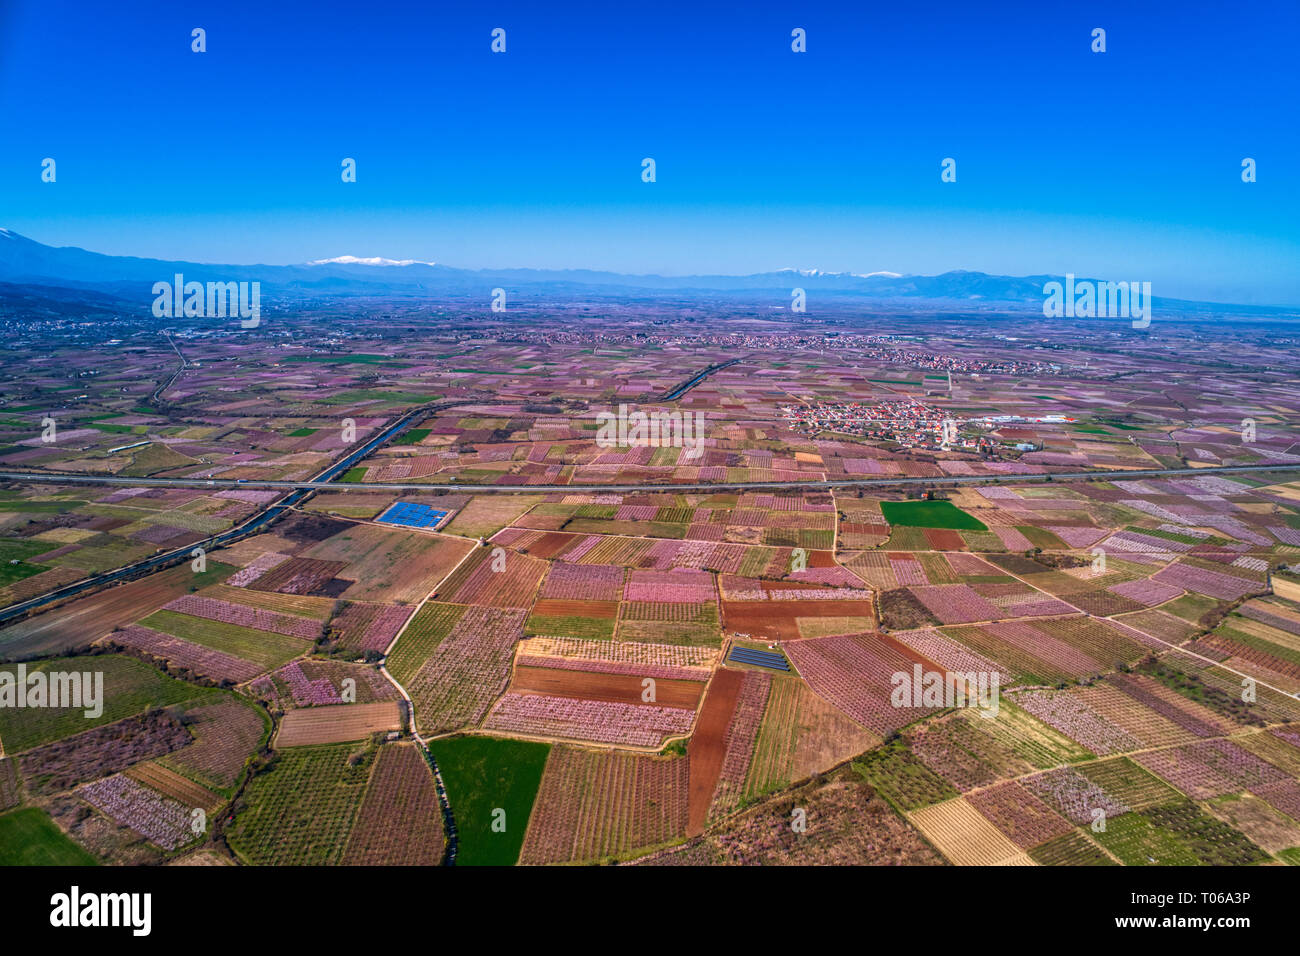 Aerial view the orchard of peach trees in bloomed in spring in the plain of Veria in northern Greece Stock Photo